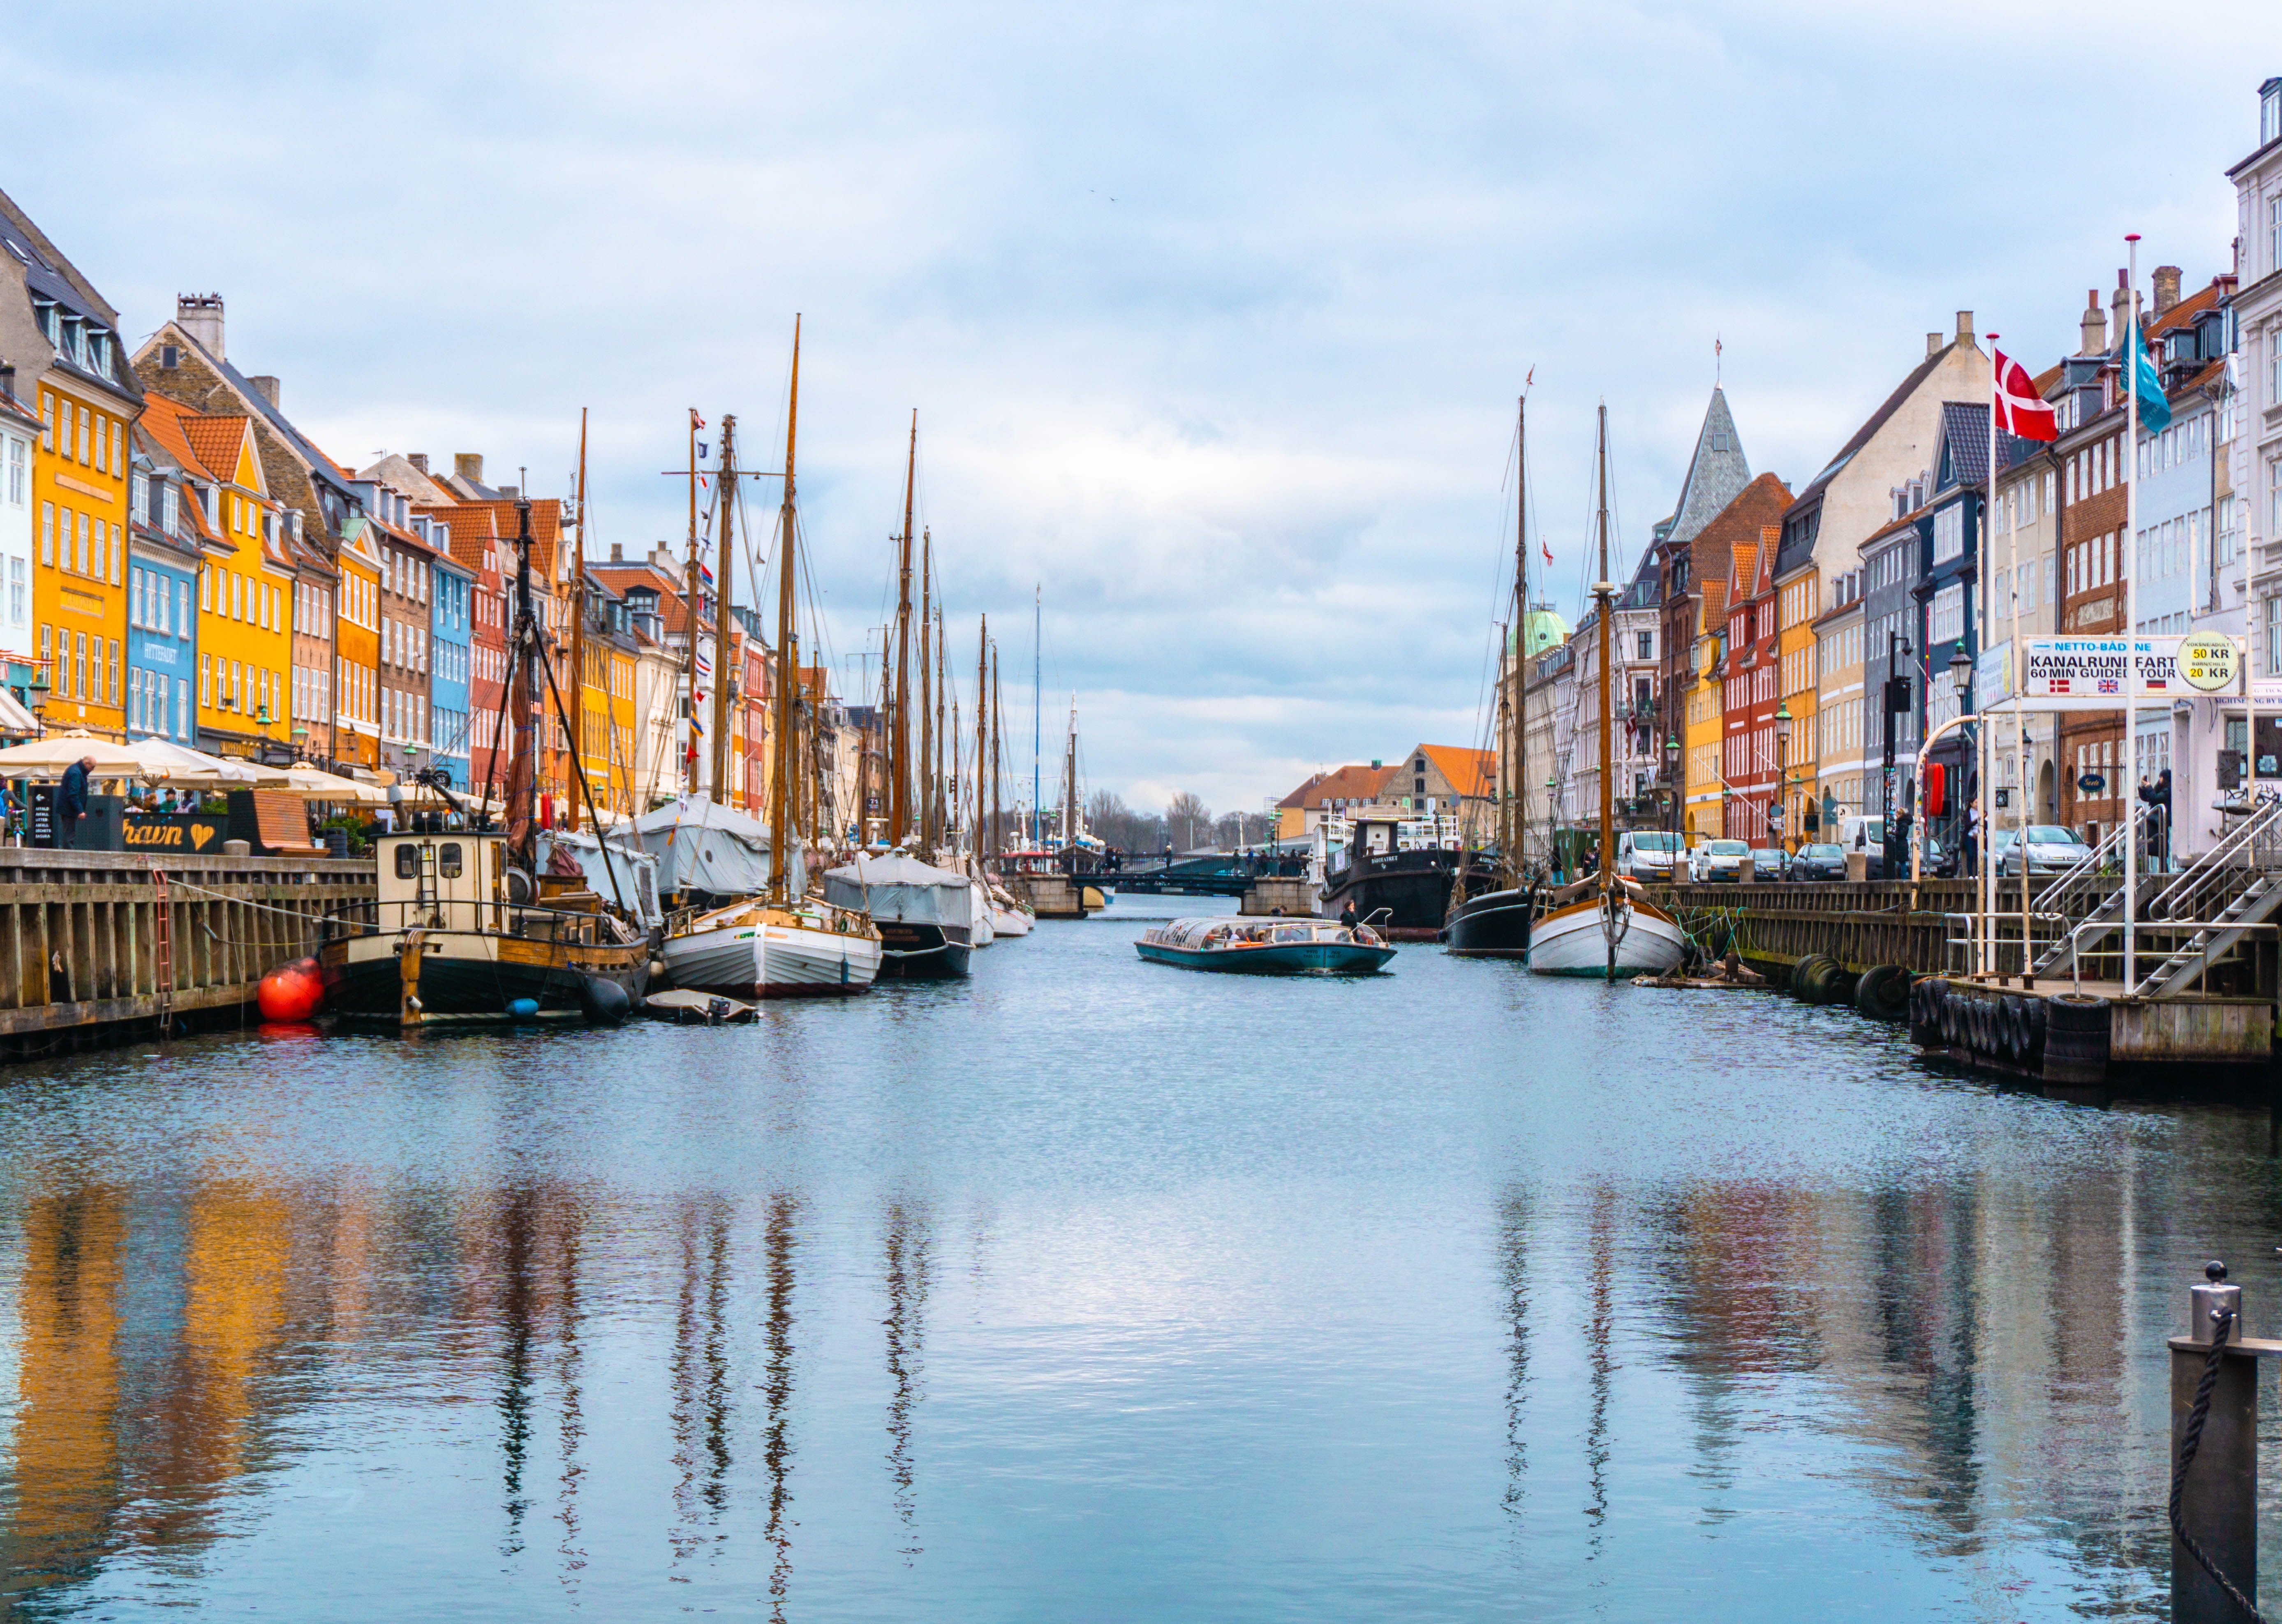 A view of Copenhagen with the waters and boats.